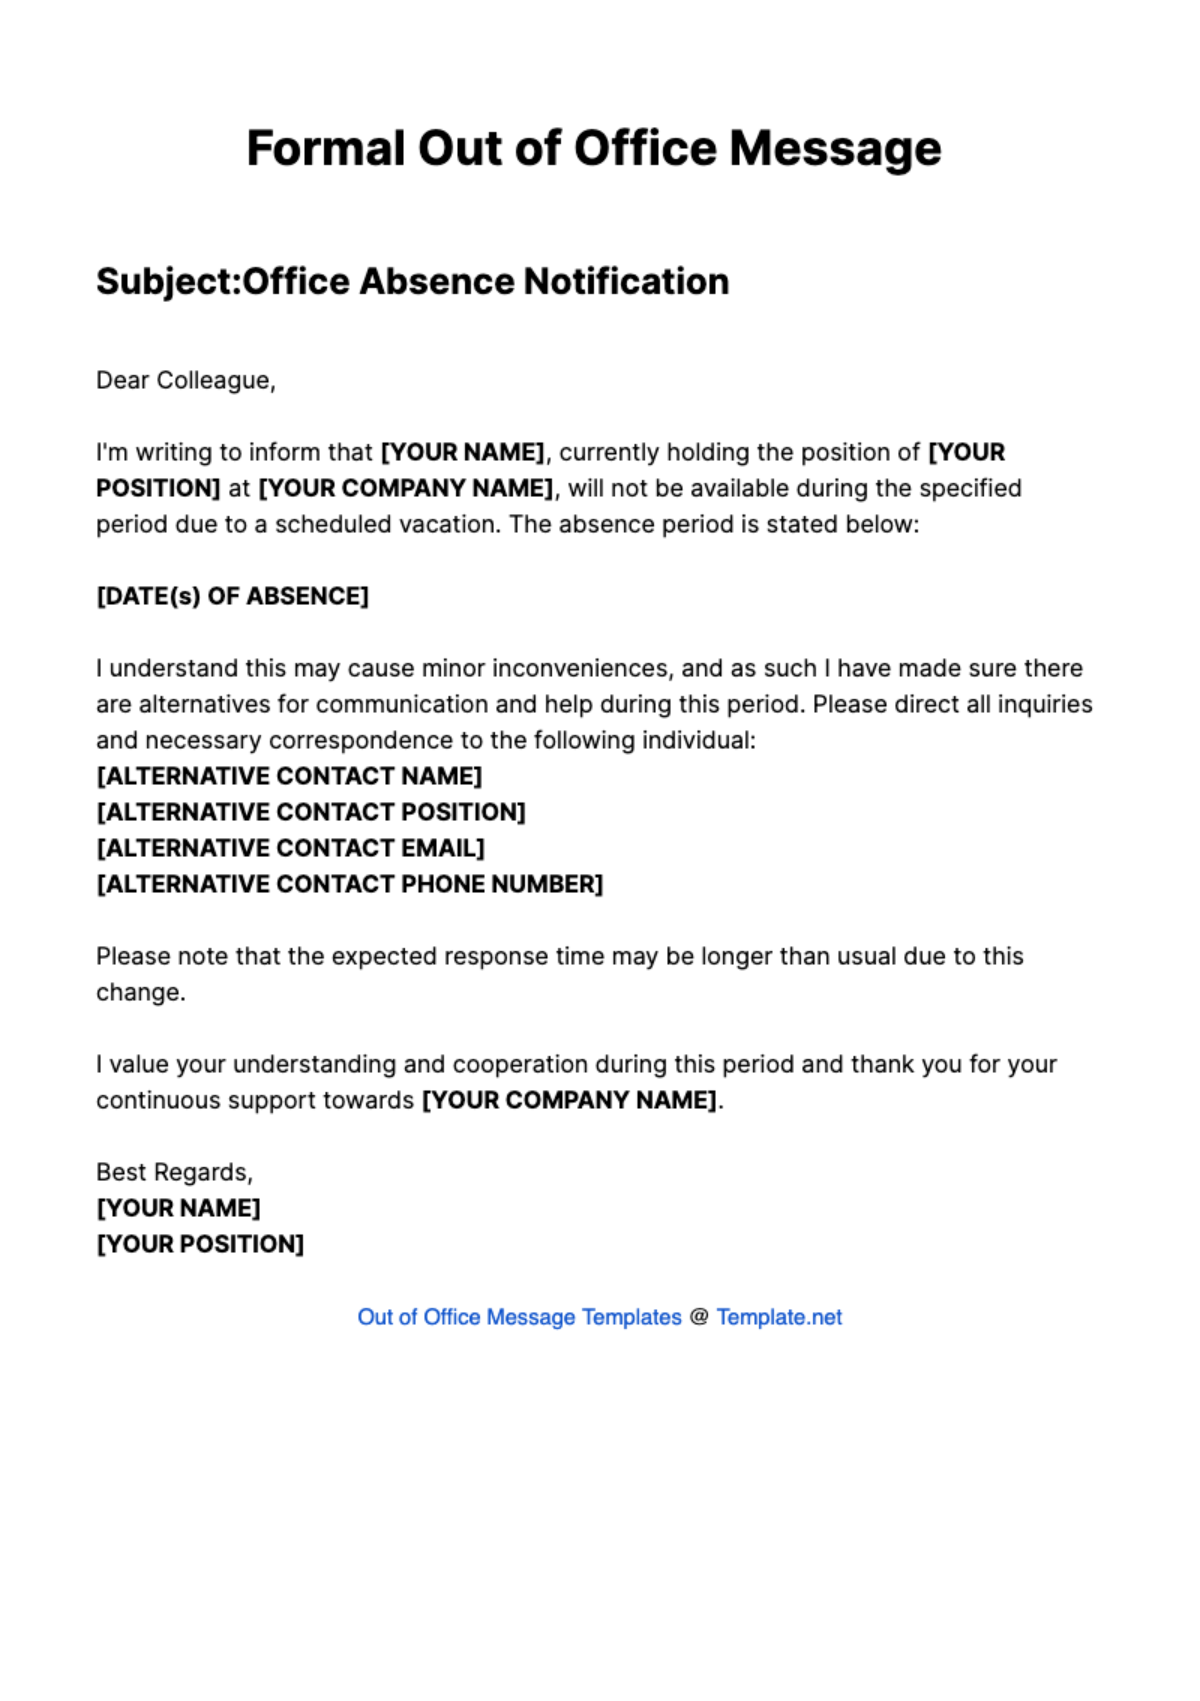 Formal Out of Office Message Template